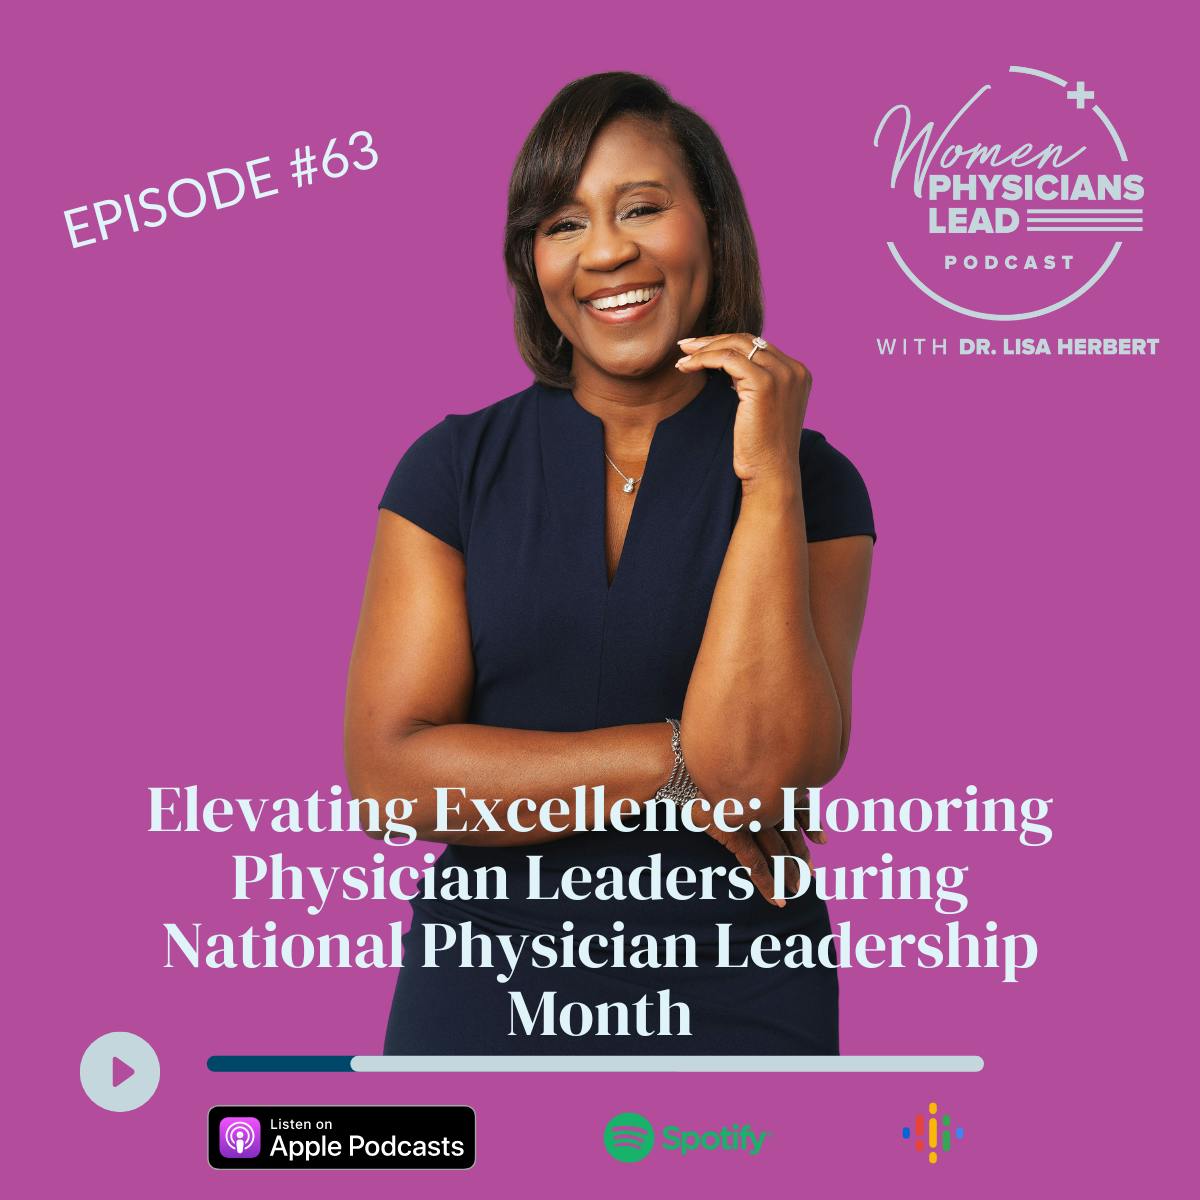 Elevating Excellence: Honoring Physician Leaders in National Physician Leadership Month